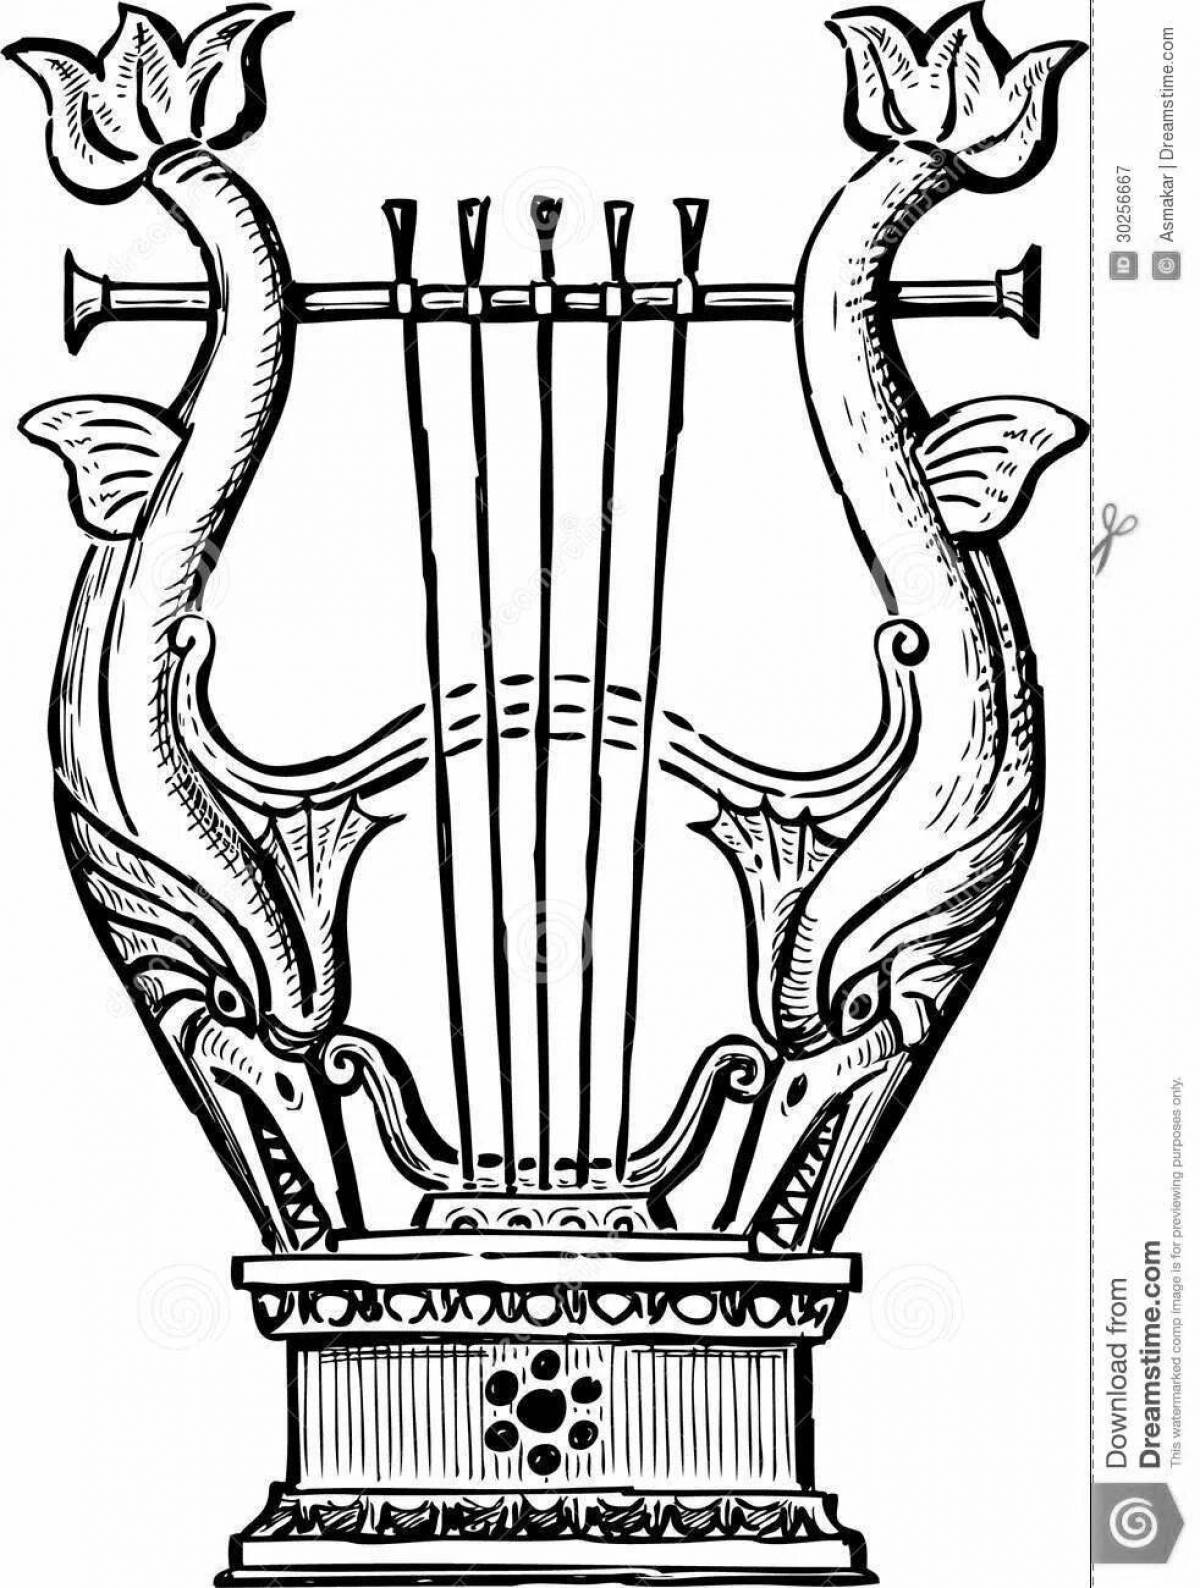 Coloring book shining lyre